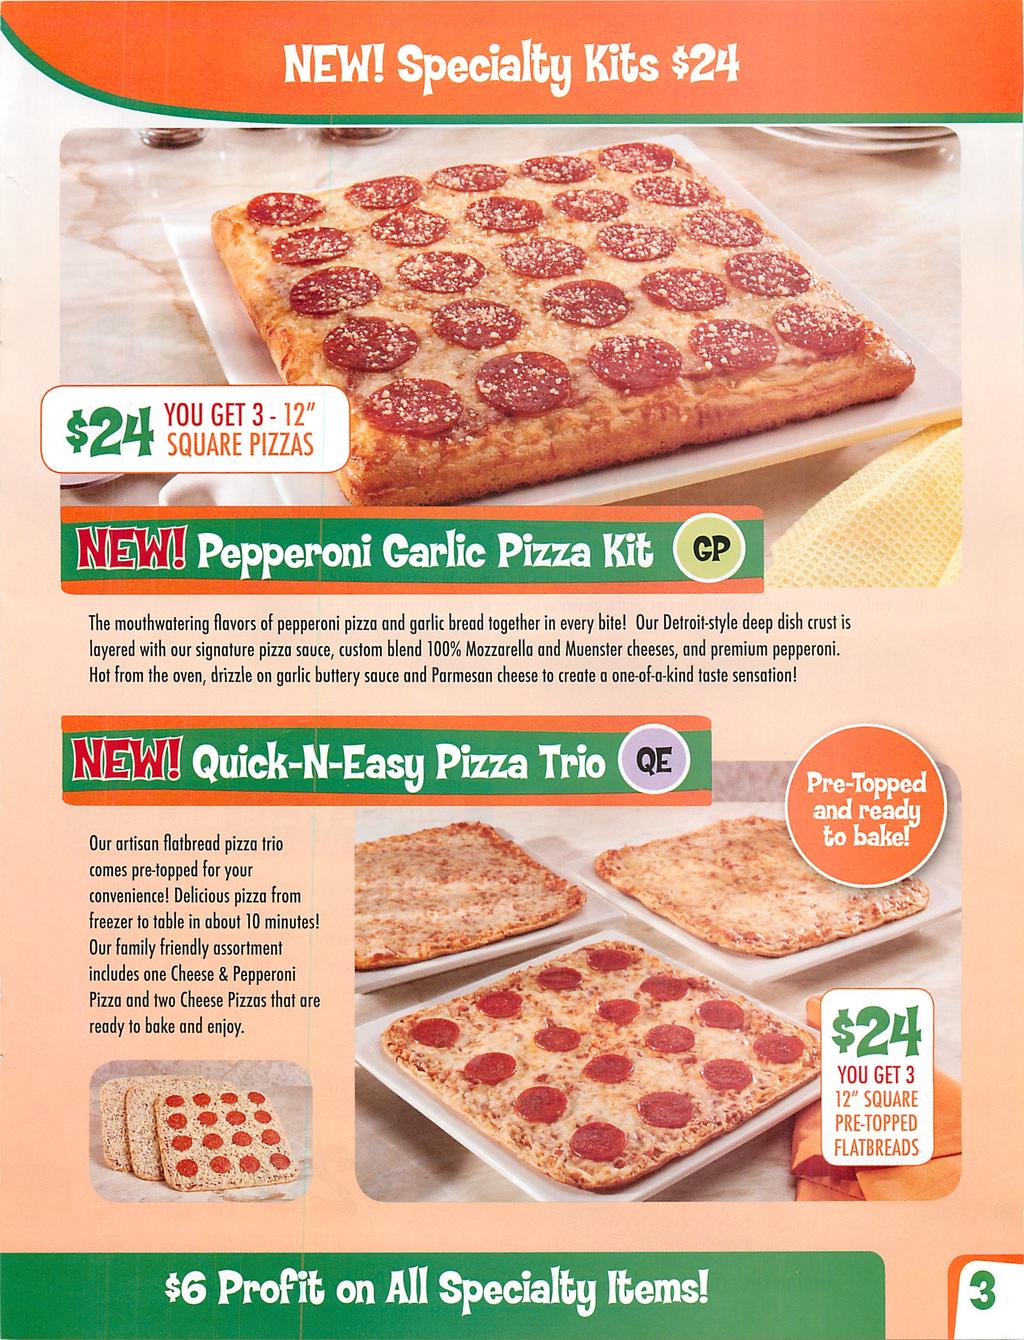 ecialtu Kits $2 m $24 YOU GET 3-12" SQUARE PIZZAS ^m Pepperoni Carlic Pizza Kit CP The mouthwatering flavors of pepperoni pizza and garlic bread together in every bite!